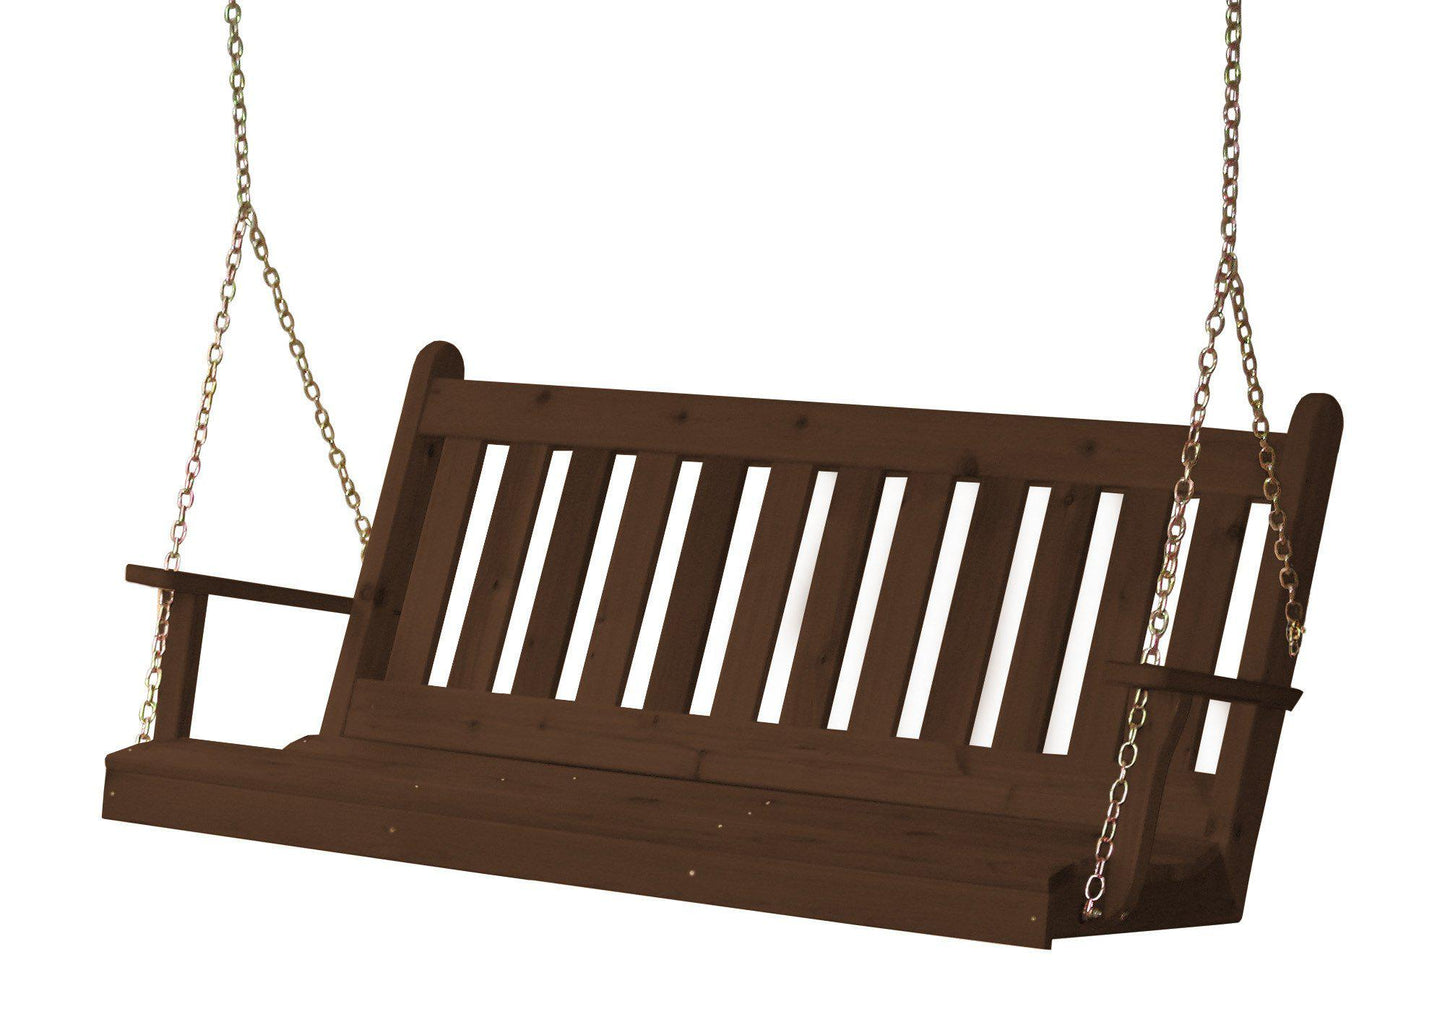 A&L FURNITURE CO. Western Red Cedar 5' Traditional English Swing - LEAD TIME TO SHIP 4 WEEKS OR LESS